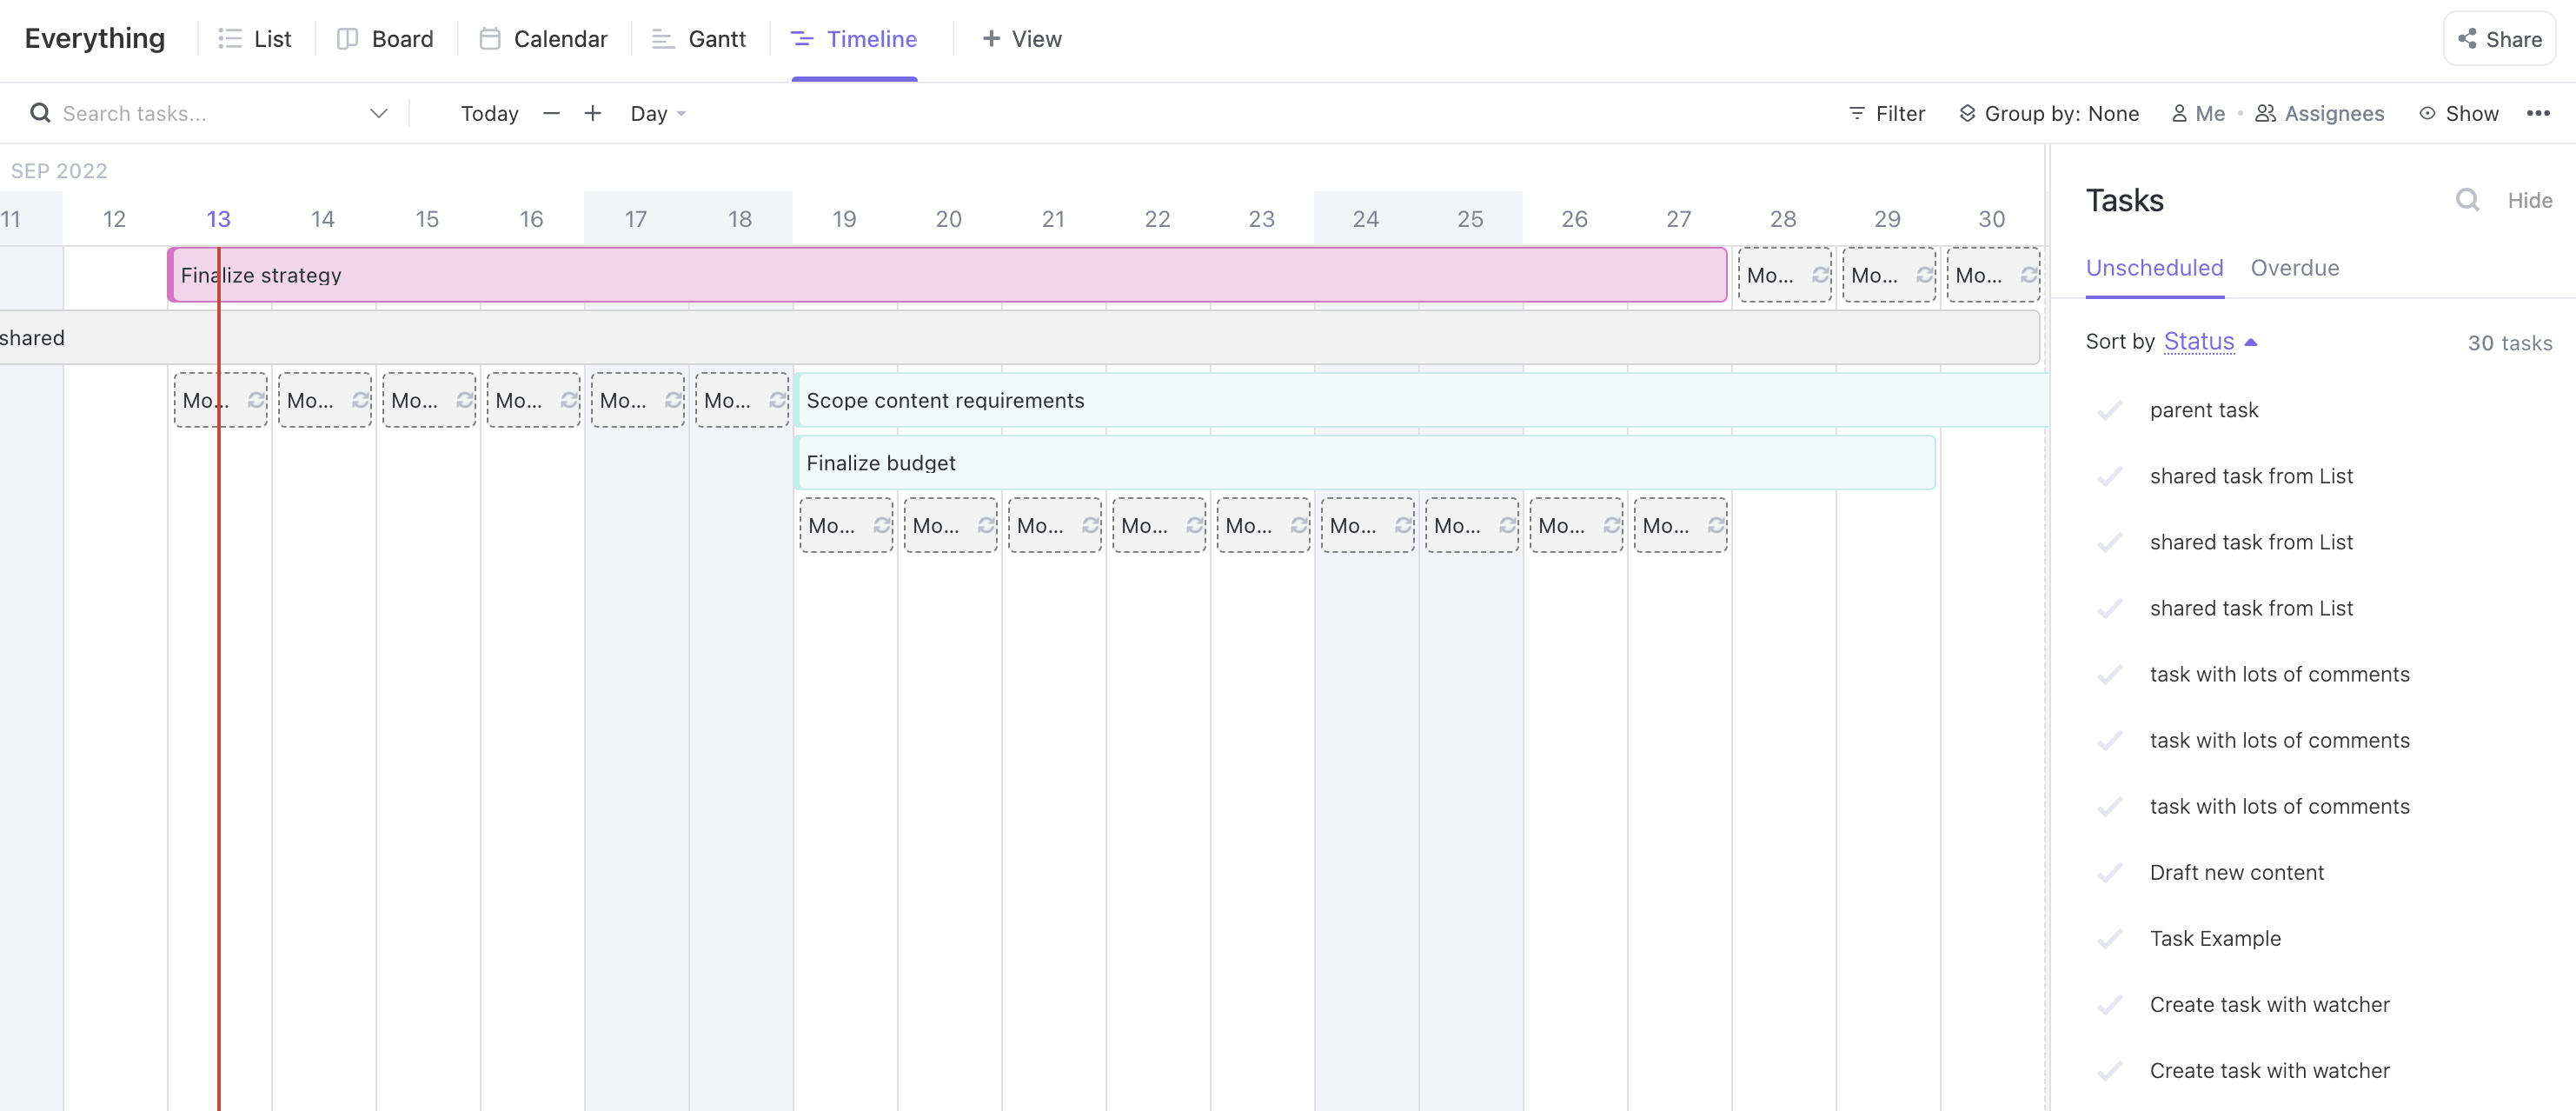 Screenshot of someone using Timeline view for PMO.